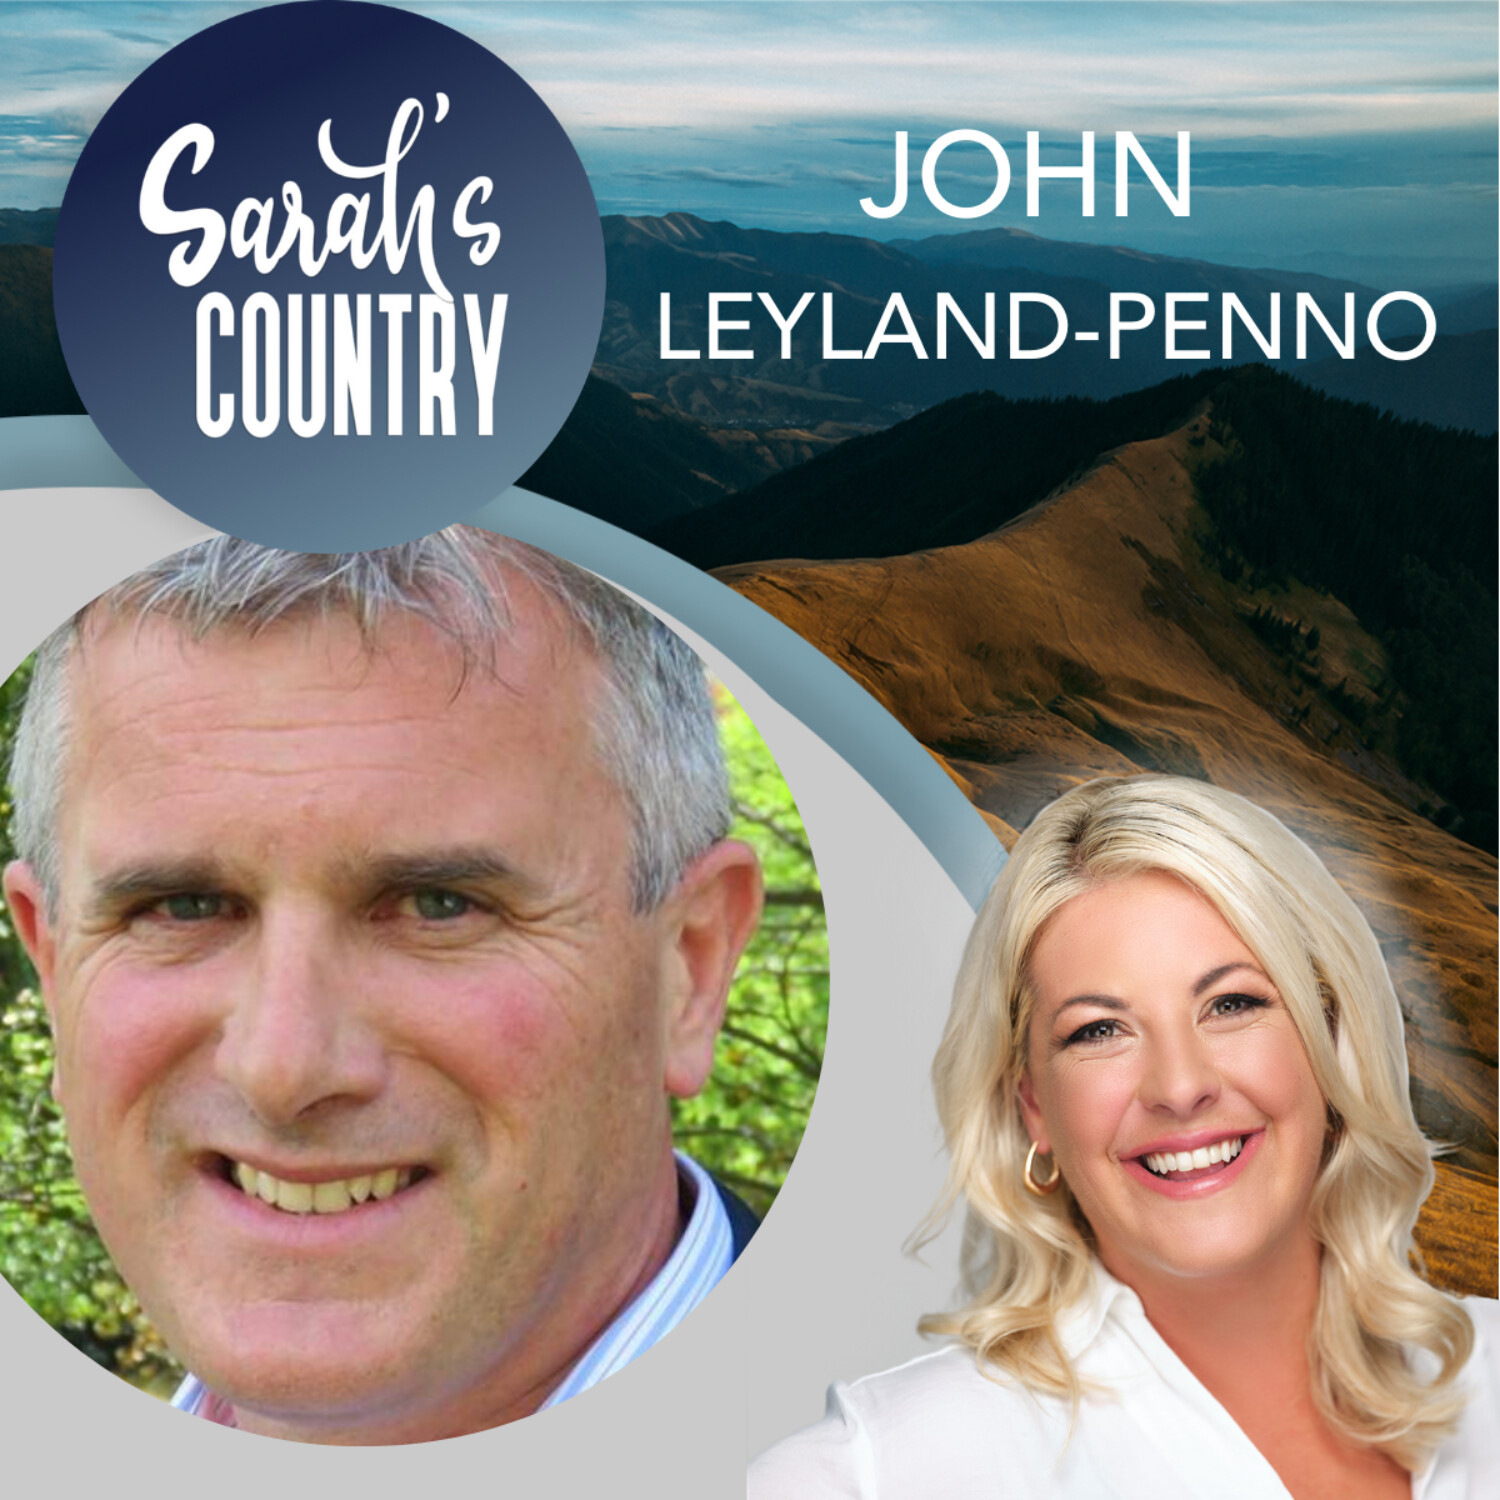 “Laggard farmers most affected by new rules” with John Leyland-Penno